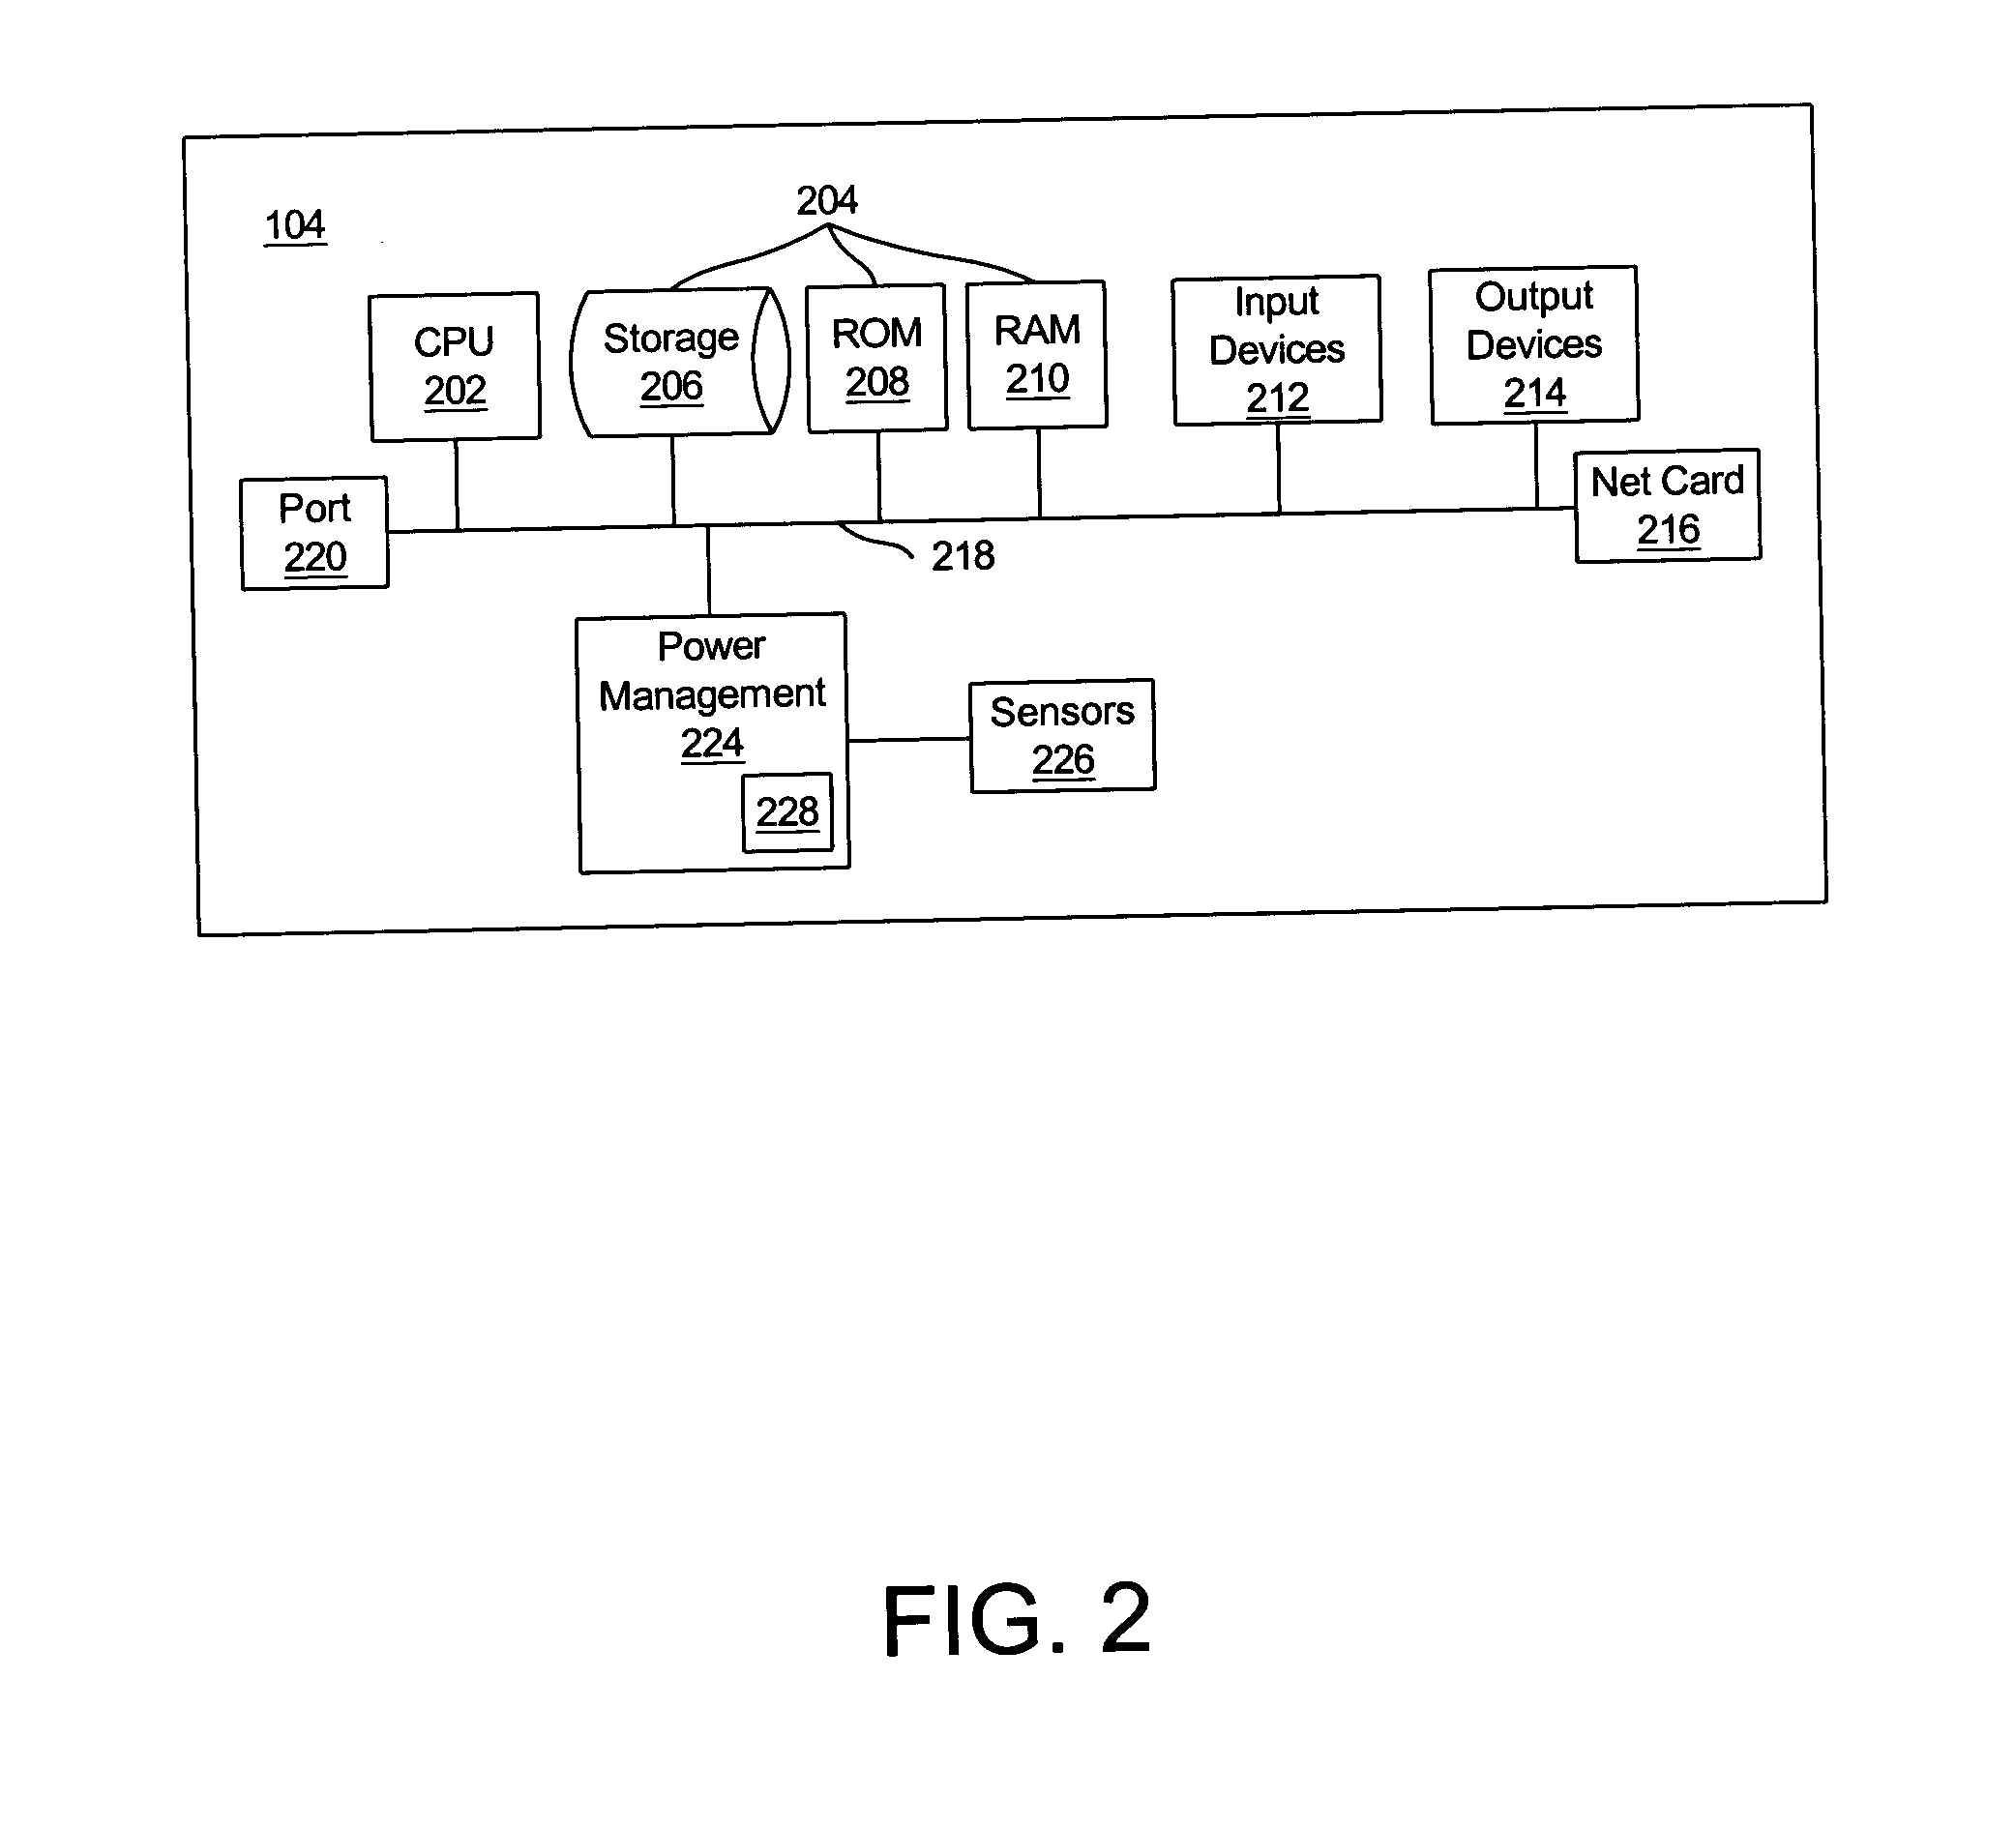 Apparatus, system, and method for autonomic power adjustment in an electronic device